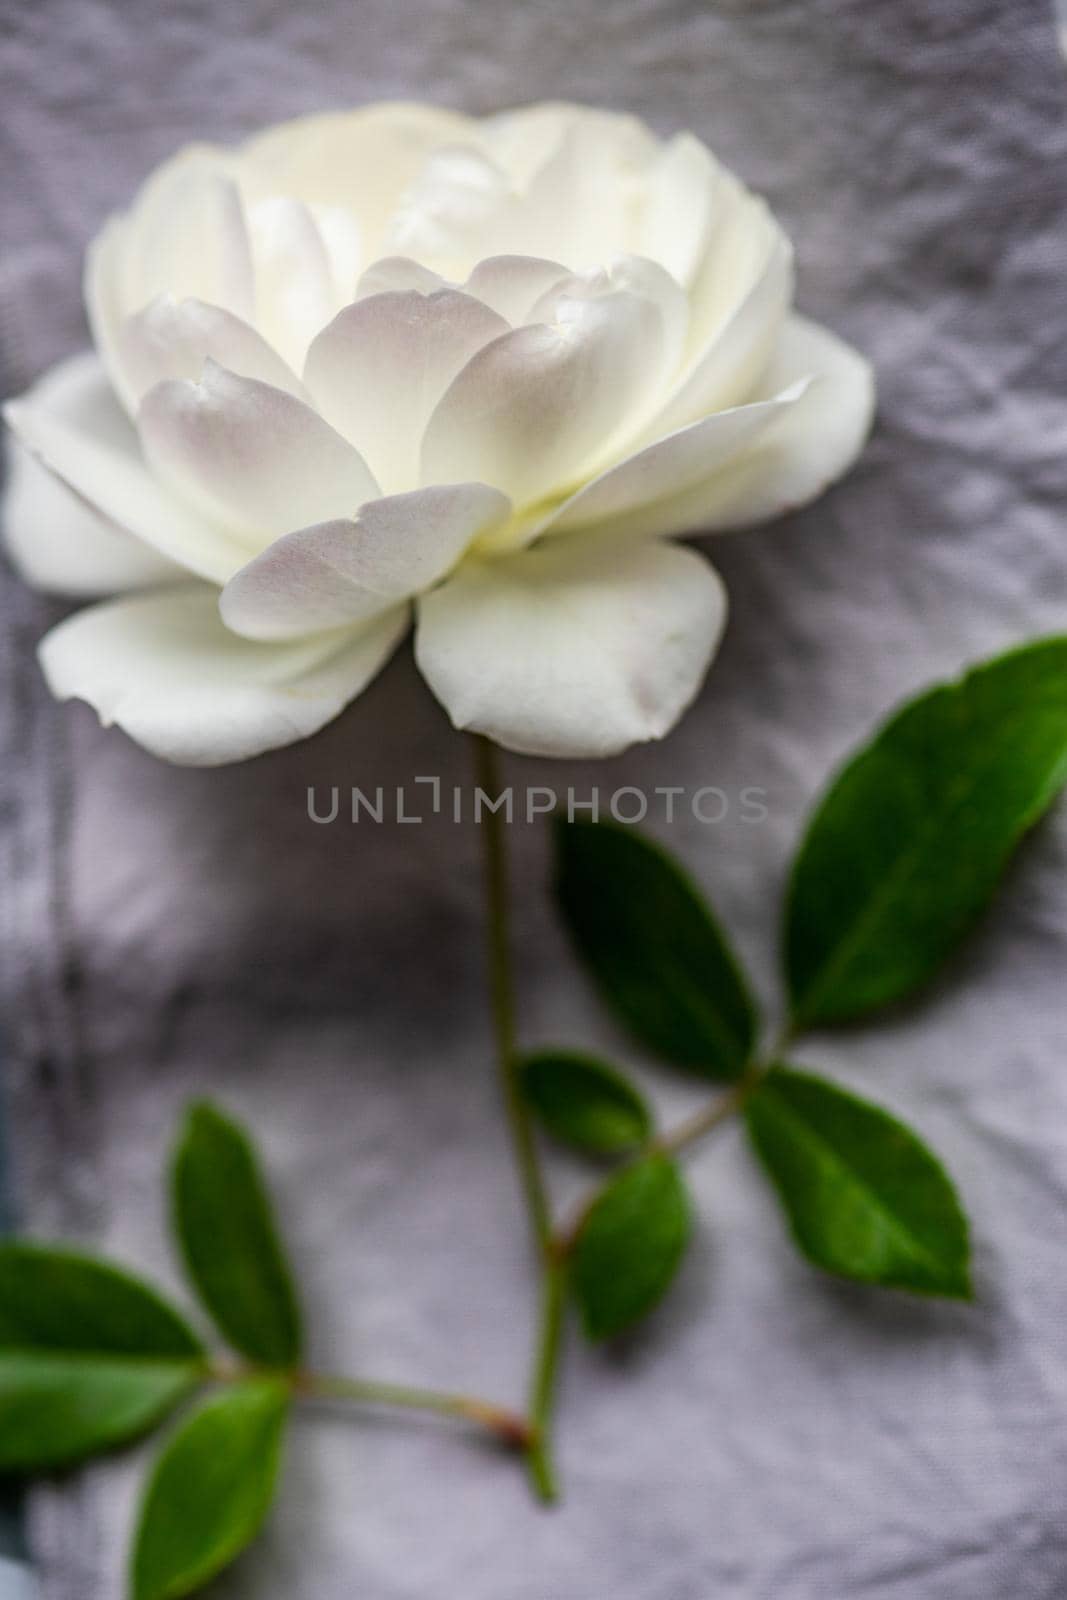 Blooming white rose flowers on concrete background as a floral card concept